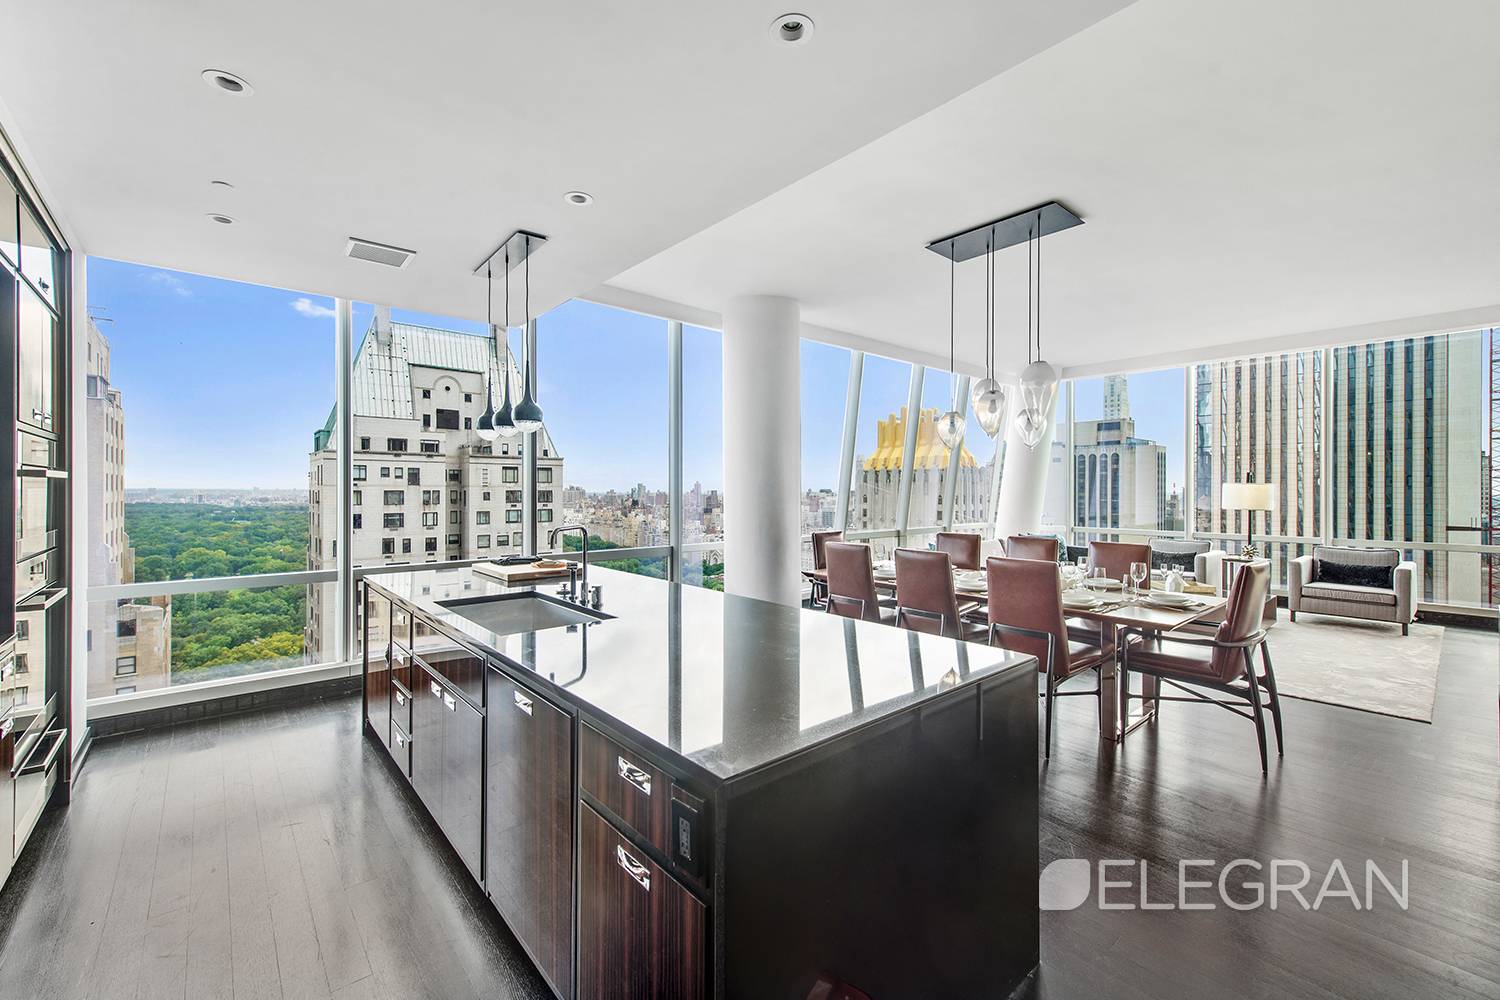 Own a home in one of the most stunning modern additions to the Manhattan skyline, One57.